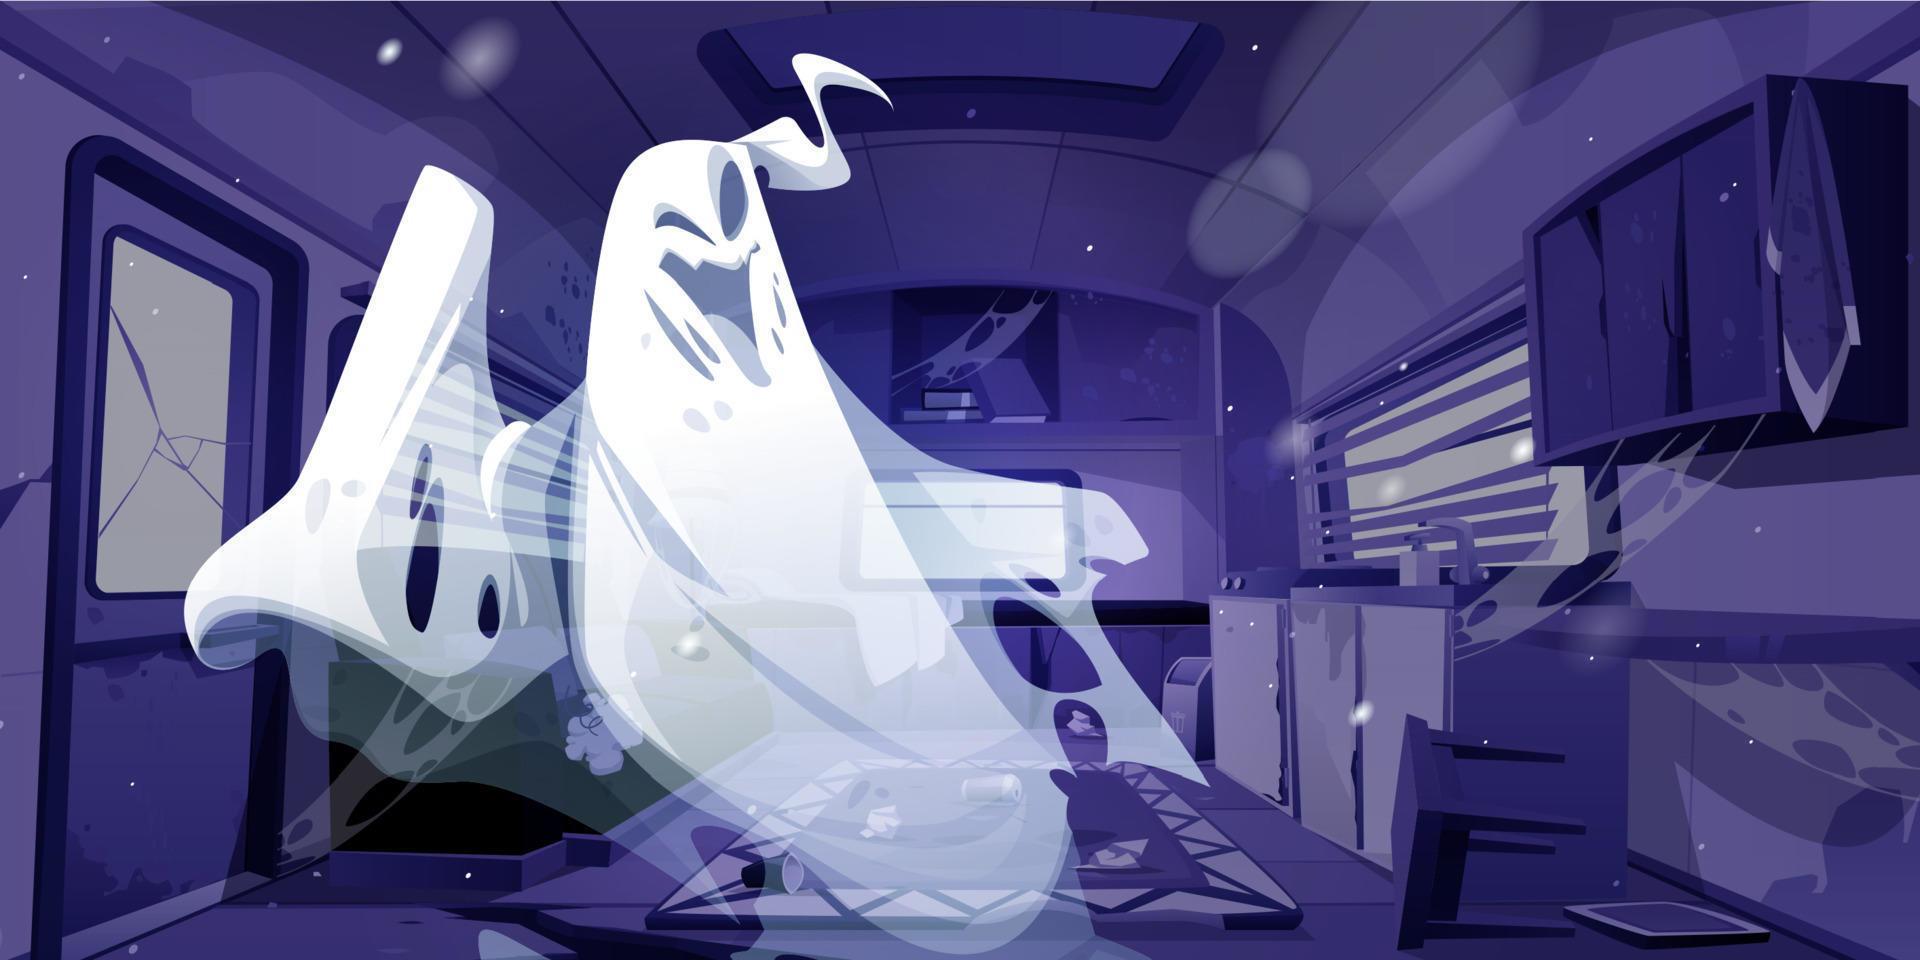 Ghost in abandoned camping trailer car interior vector